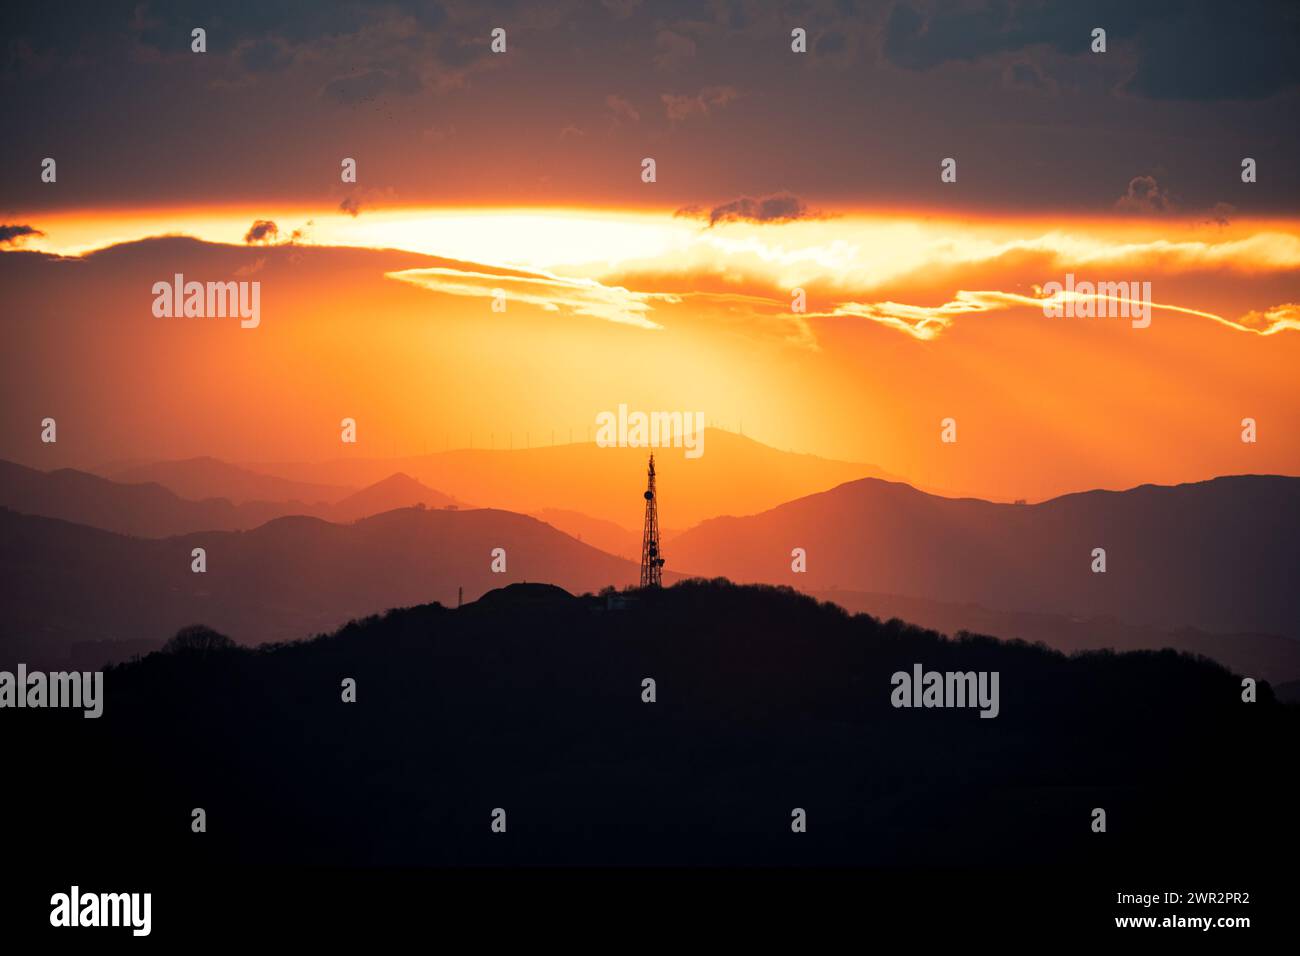 landscape of a sunset in the mountains, images with a lot of contrast and a large orange and reddish sky typical of the golden hour, in the center of Stock Photo